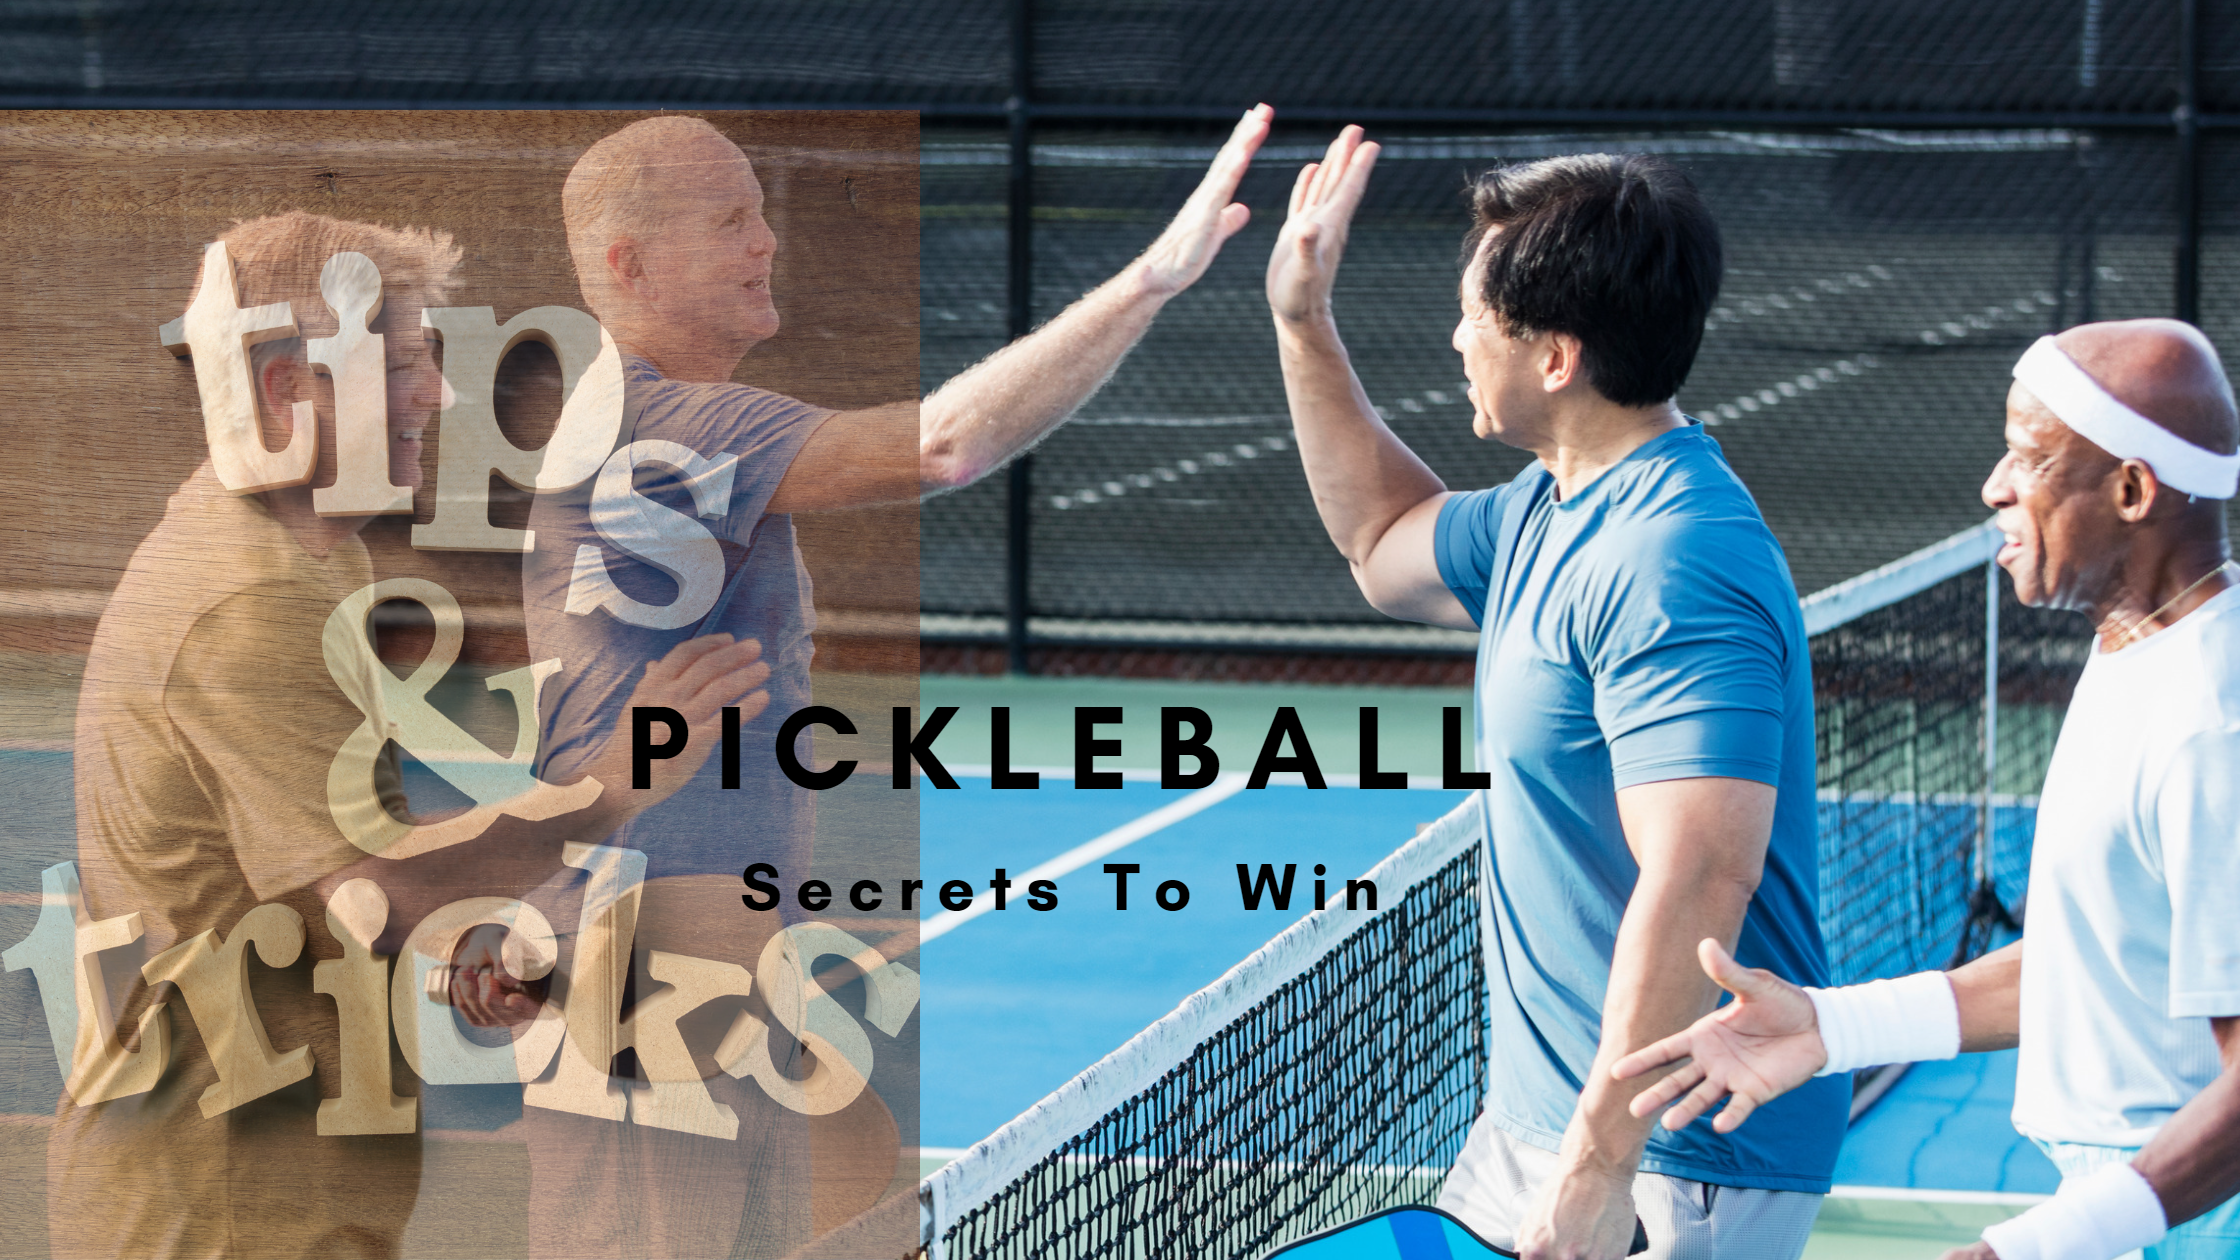 Top Pickleball Tips You Must Know To improve your game in 2023